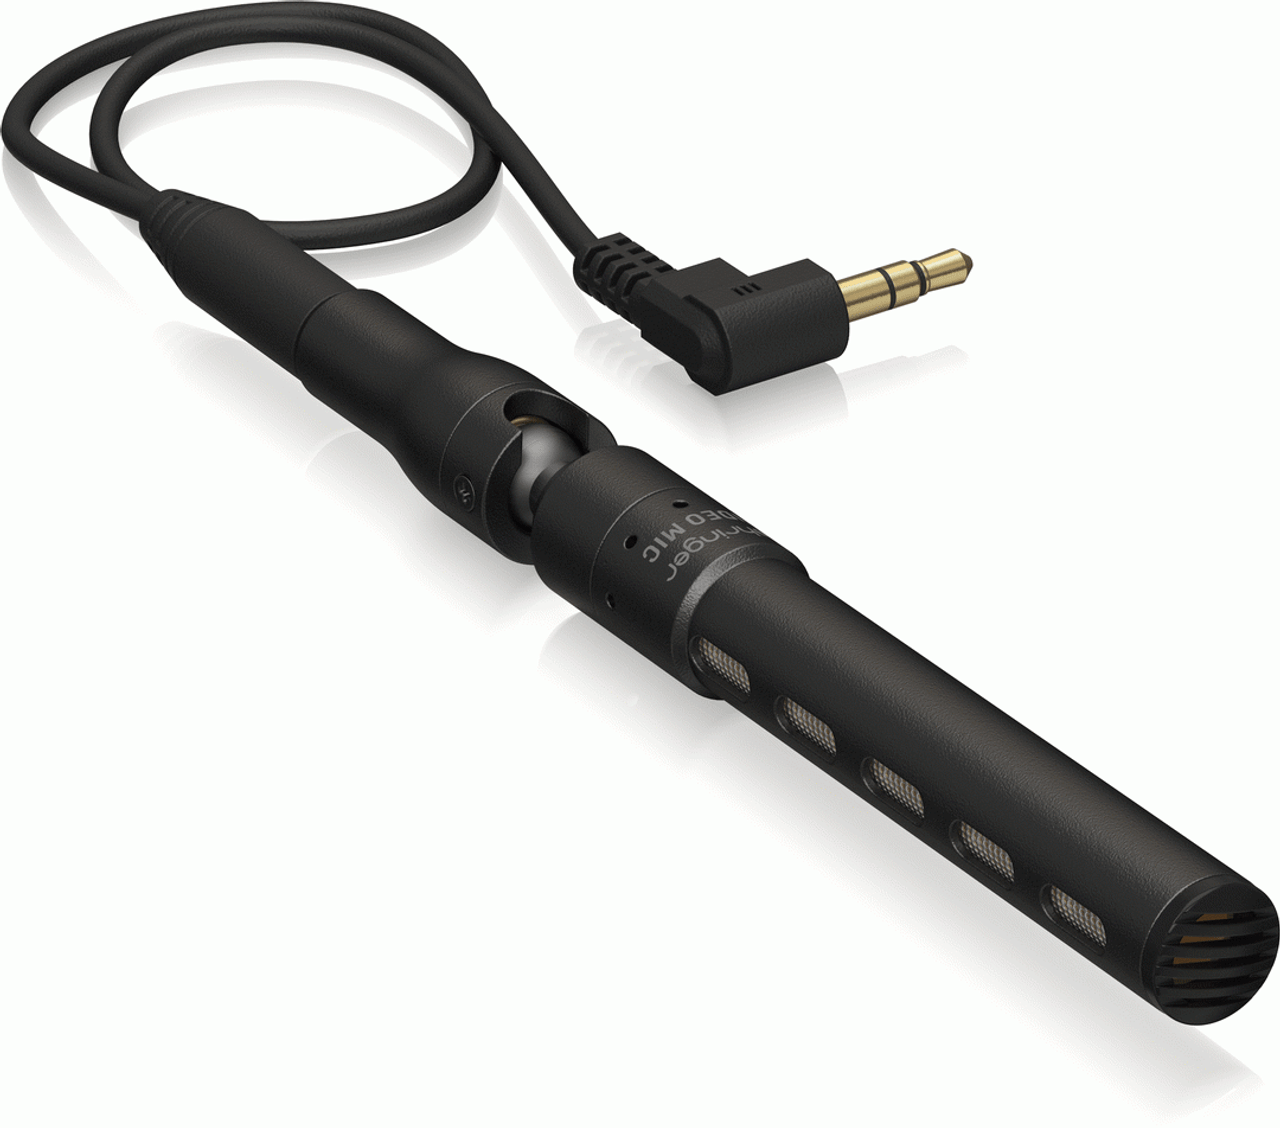 The Behringer VIDEO MIC CONDENSOR Mic For Video